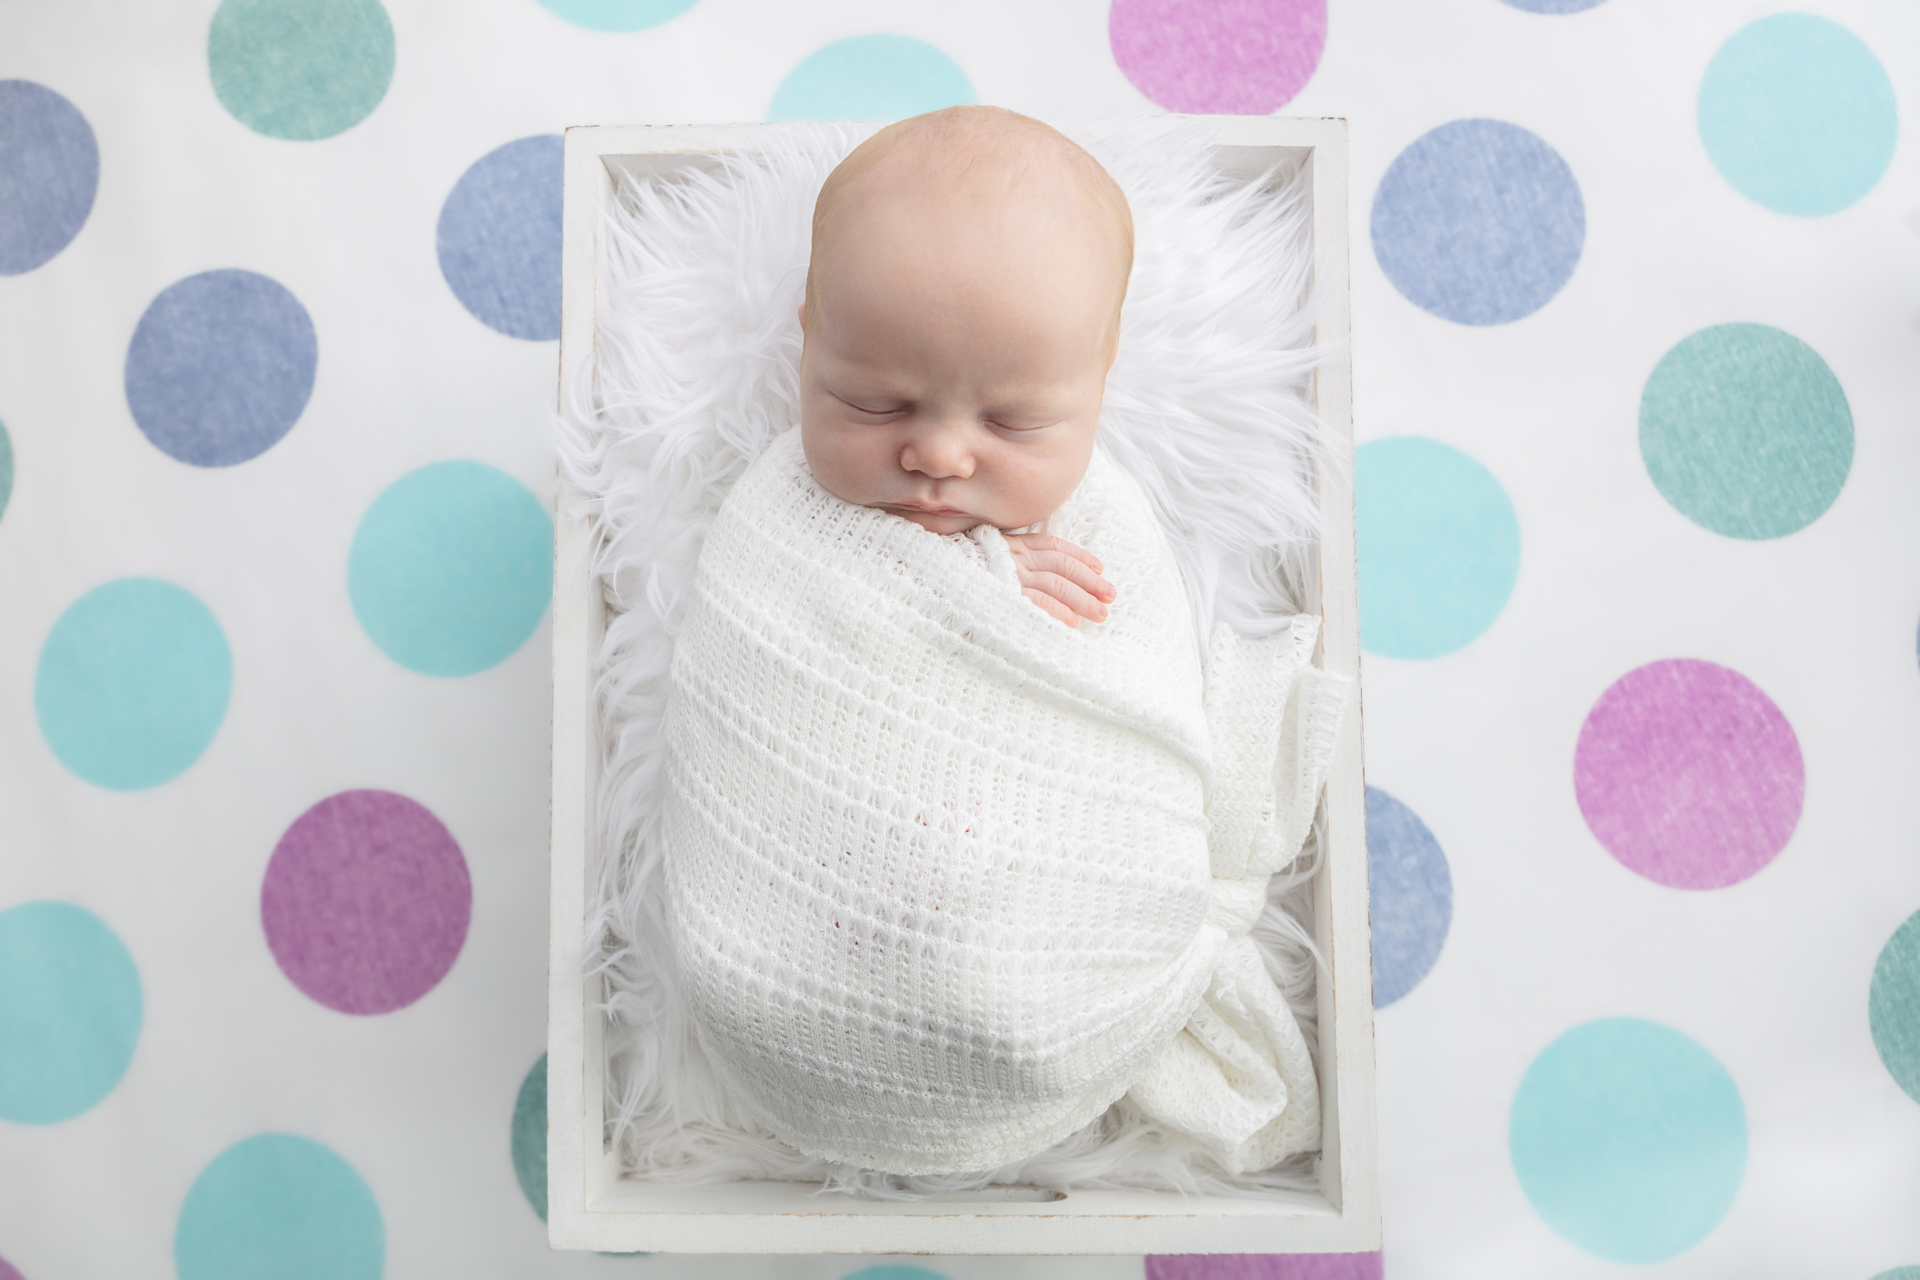 blue, aqua, soft green, and soft purple polka dot background; newborn baby wrapped in an open knit white swaddle